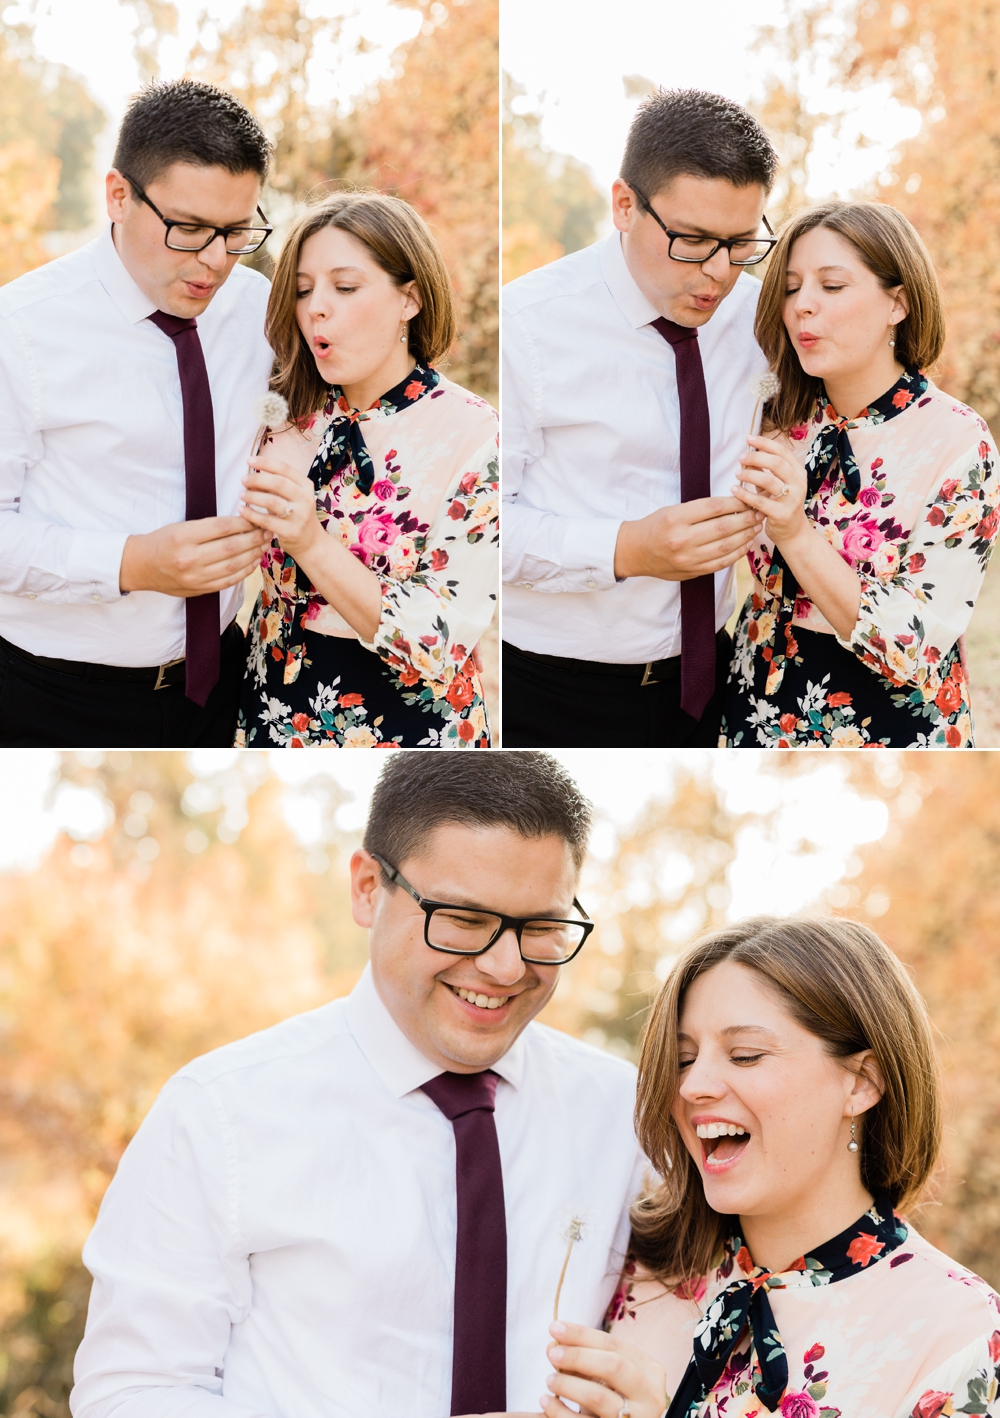 hart park bakersfield engagement session, blowing wishes, chocolate diamond ring